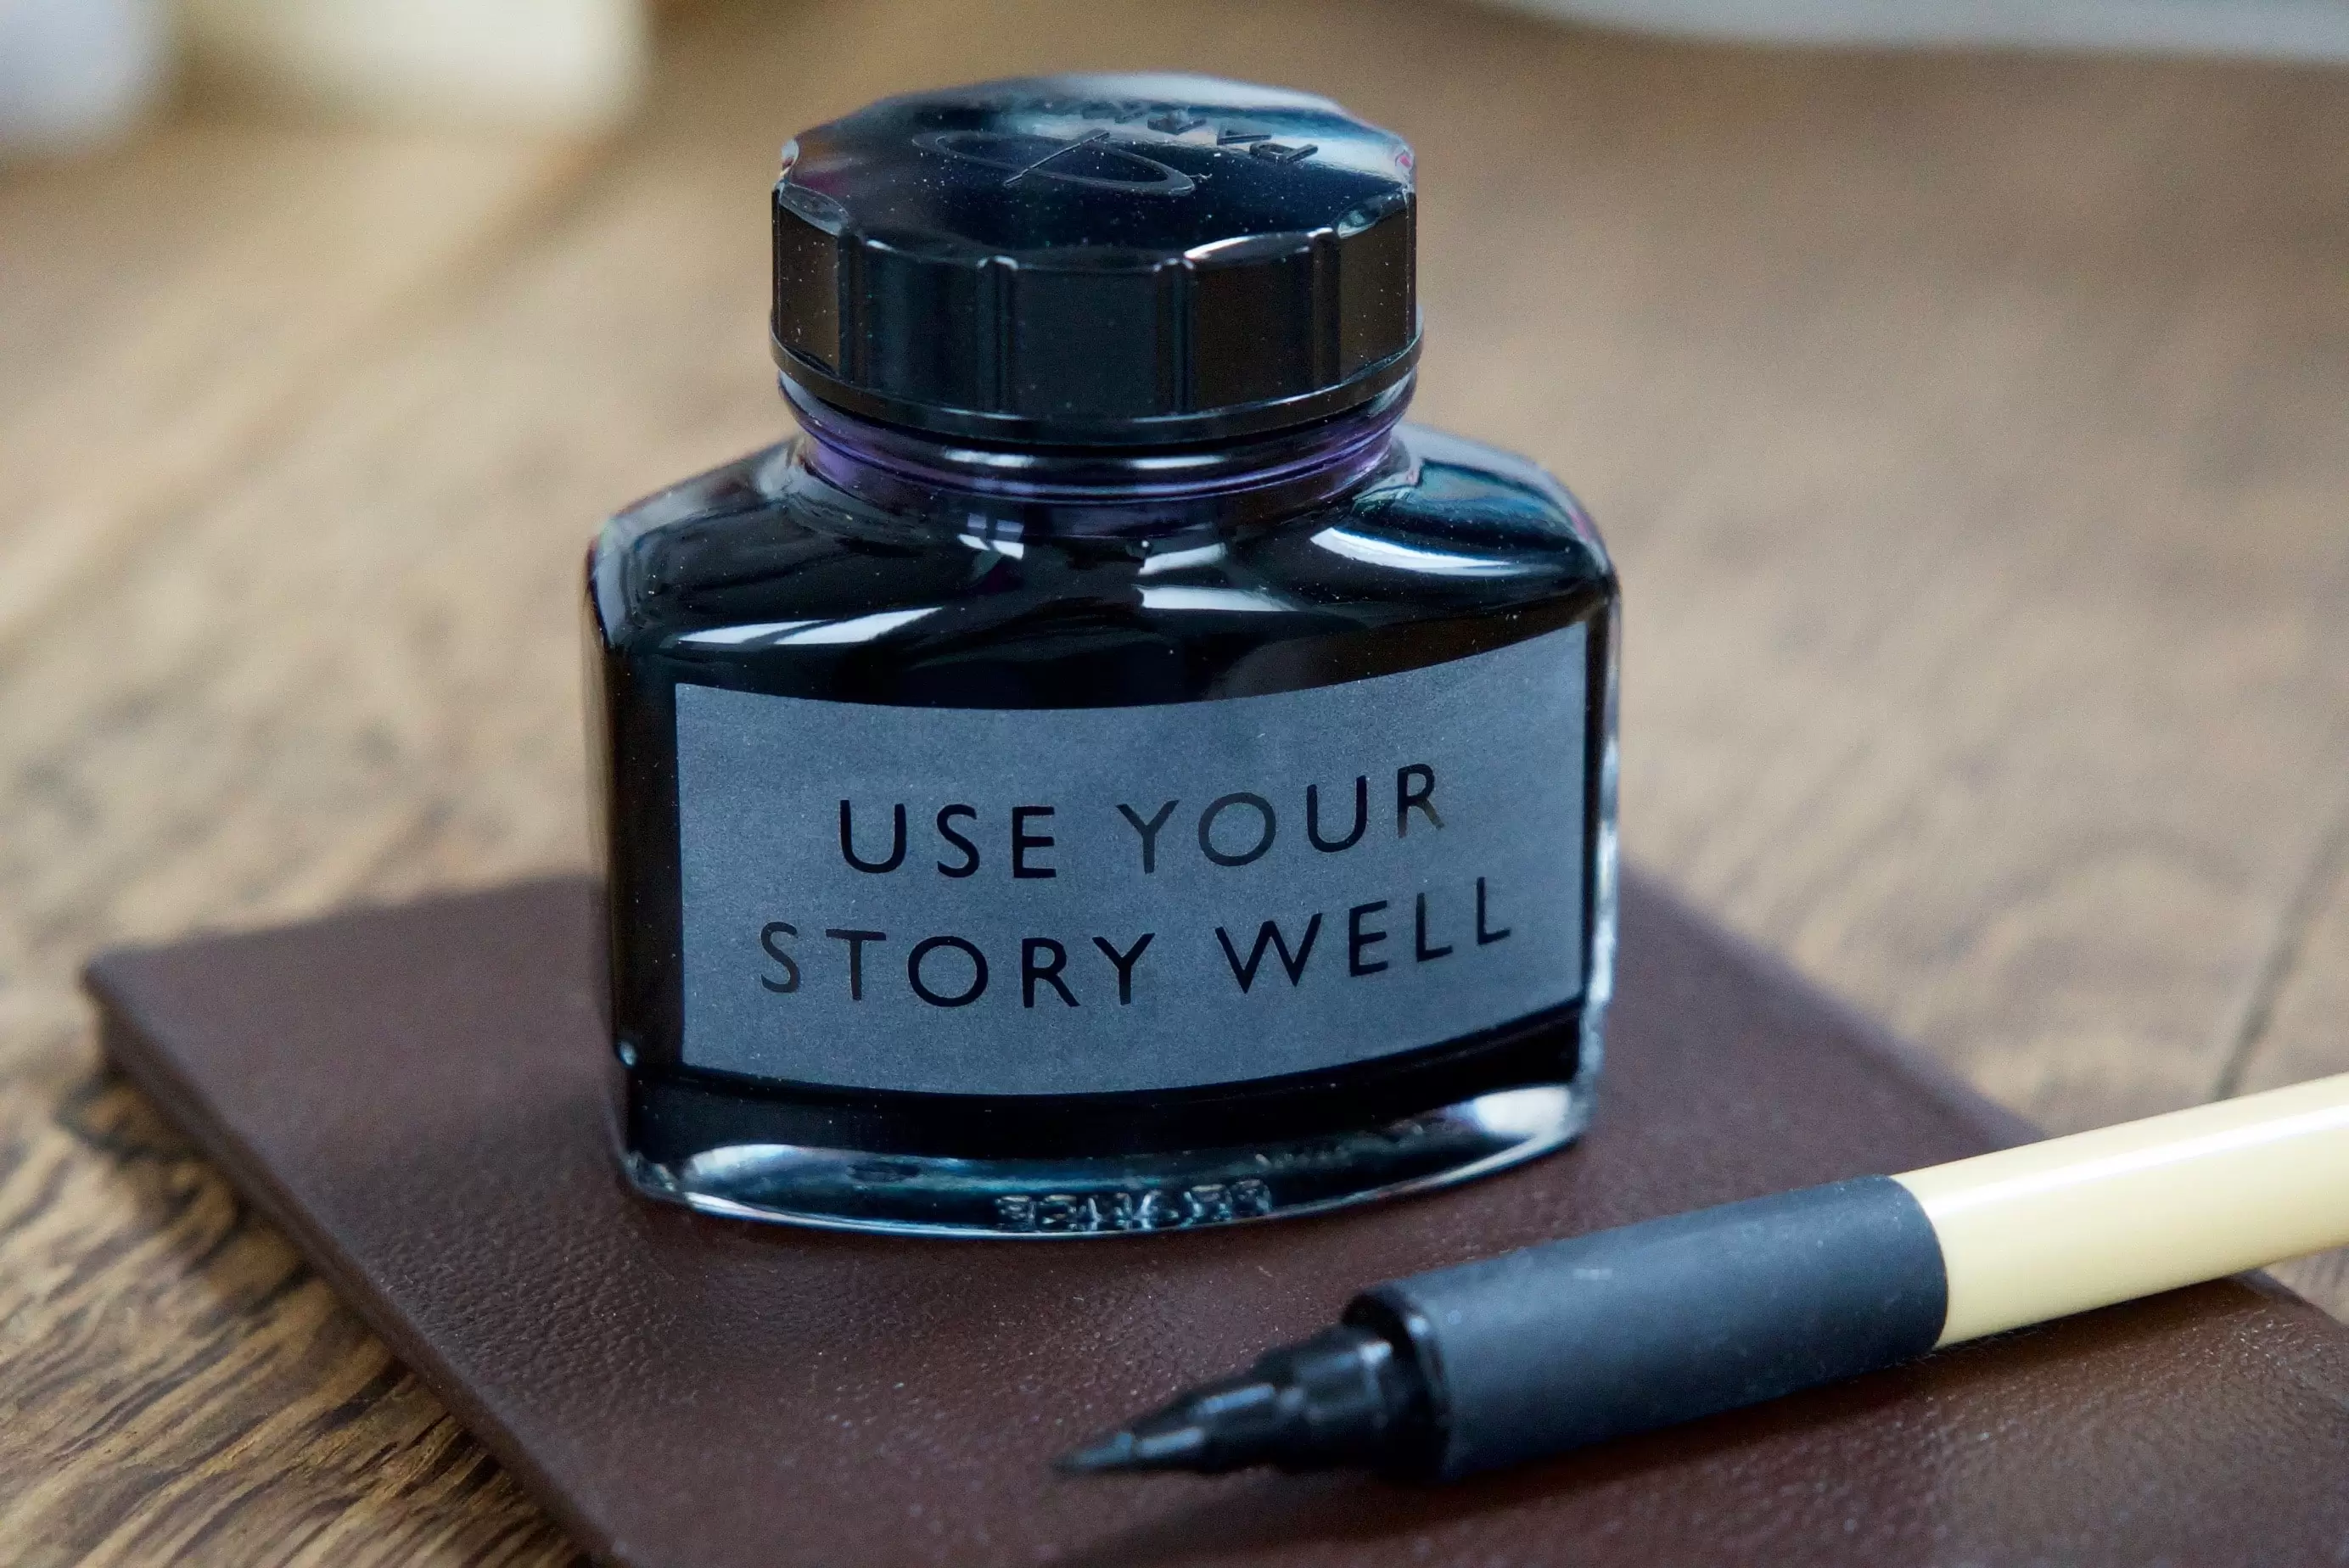 Use your story well ink pot and pen